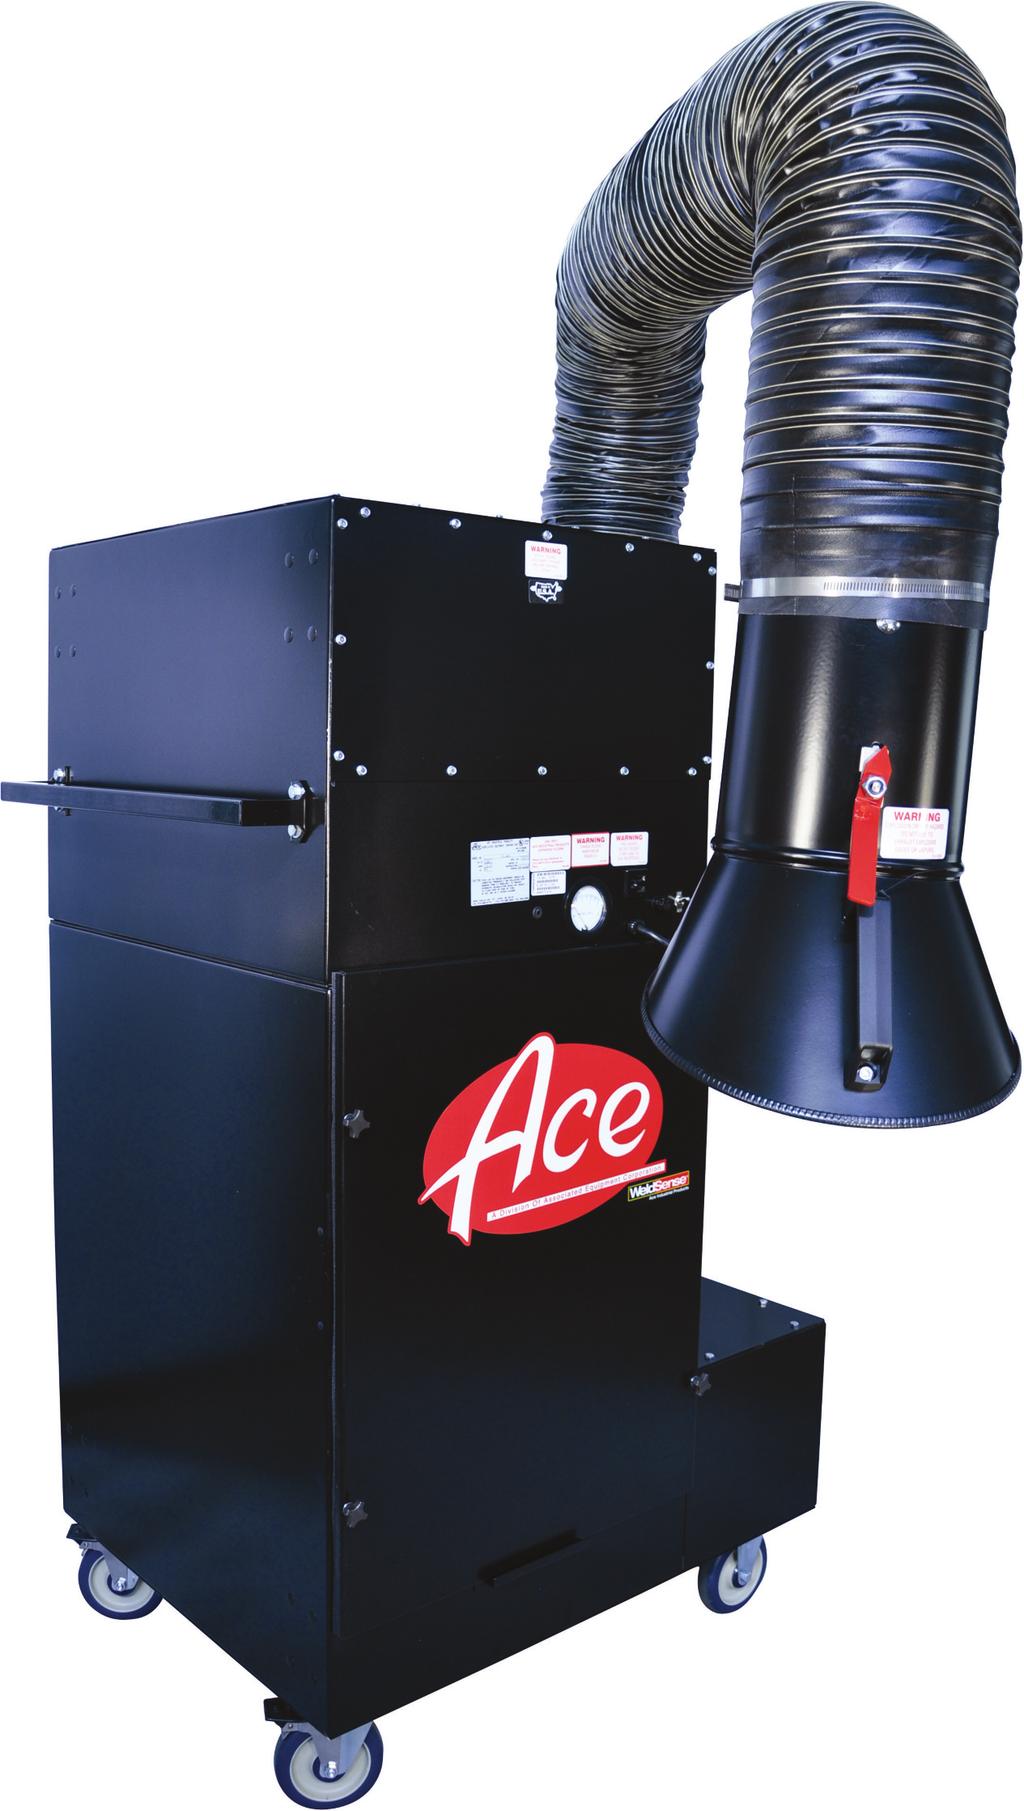 73-851 High efficiency mobile fume extractor with an automatic cleanable filter system.